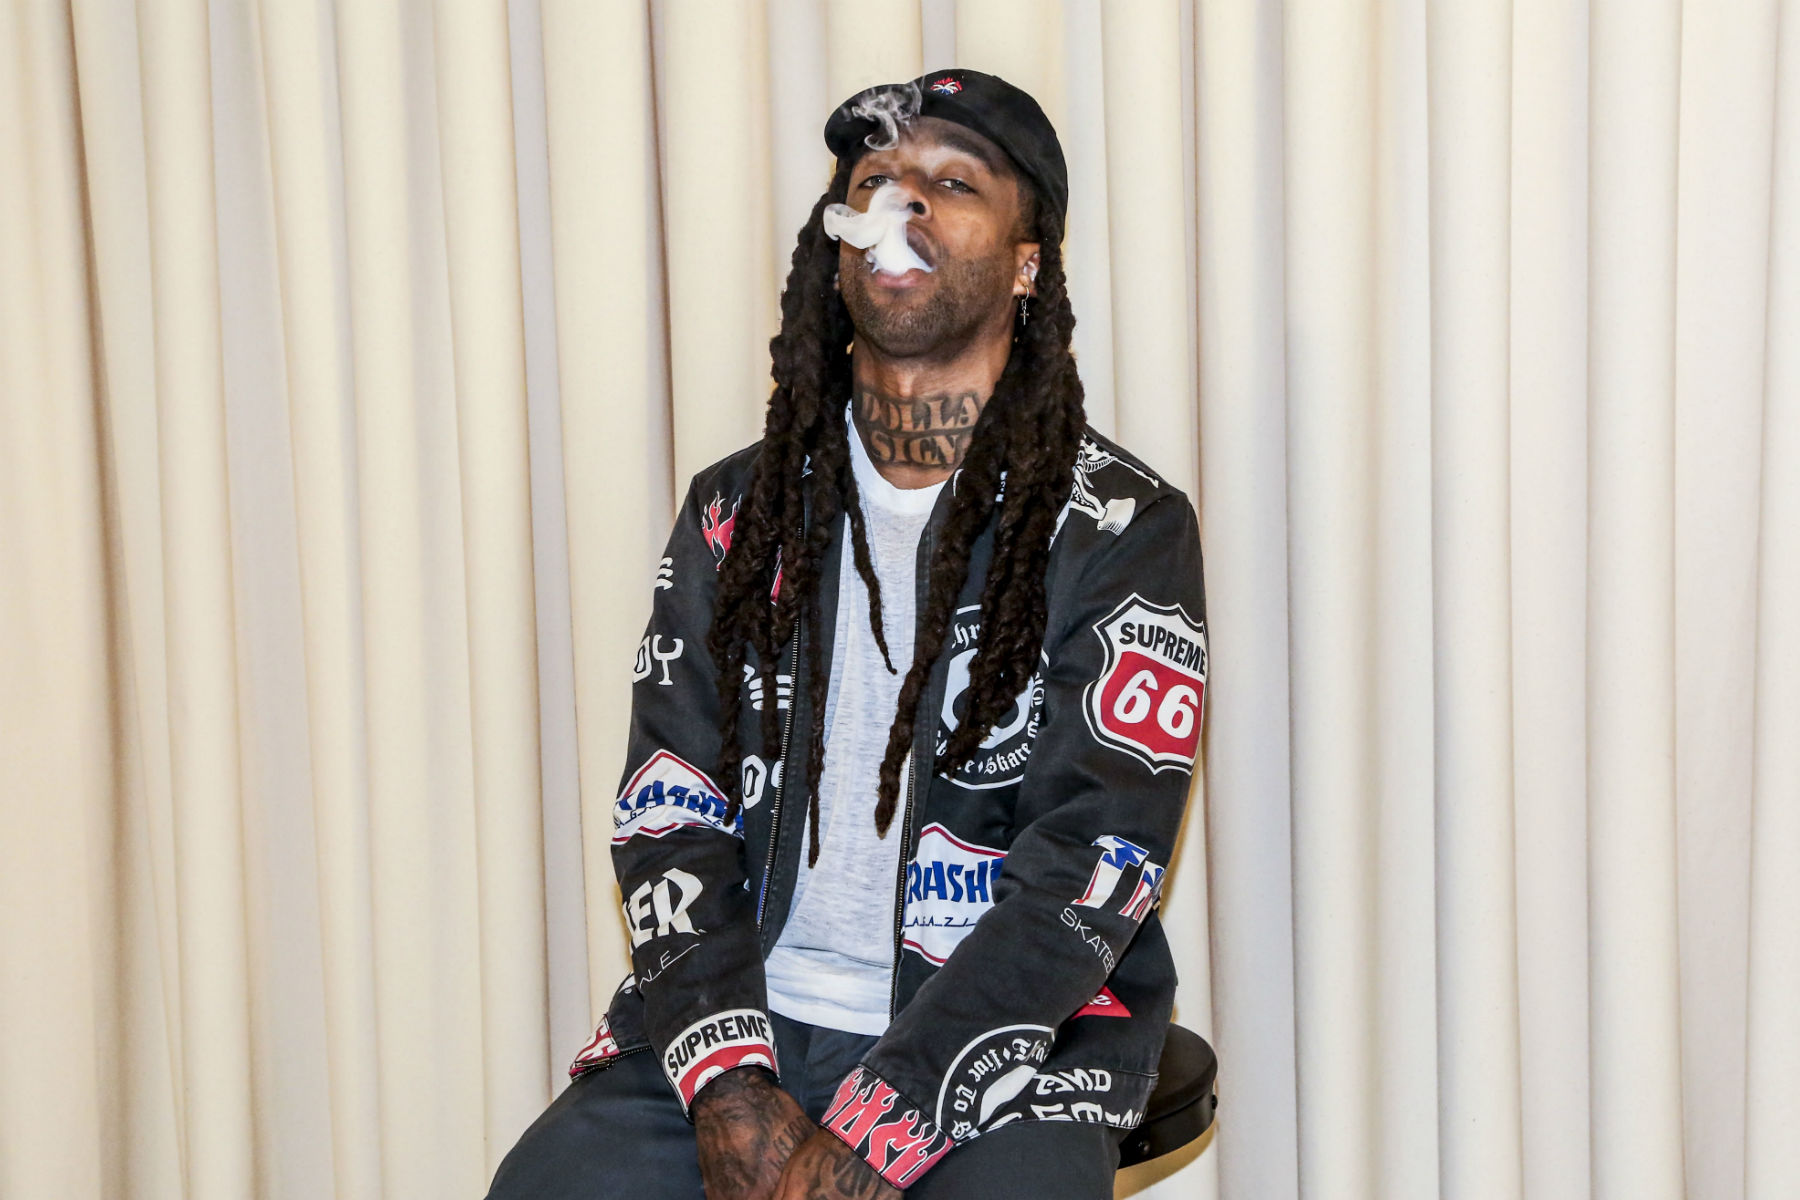 ty dolla sign free tc zip on dbre.com